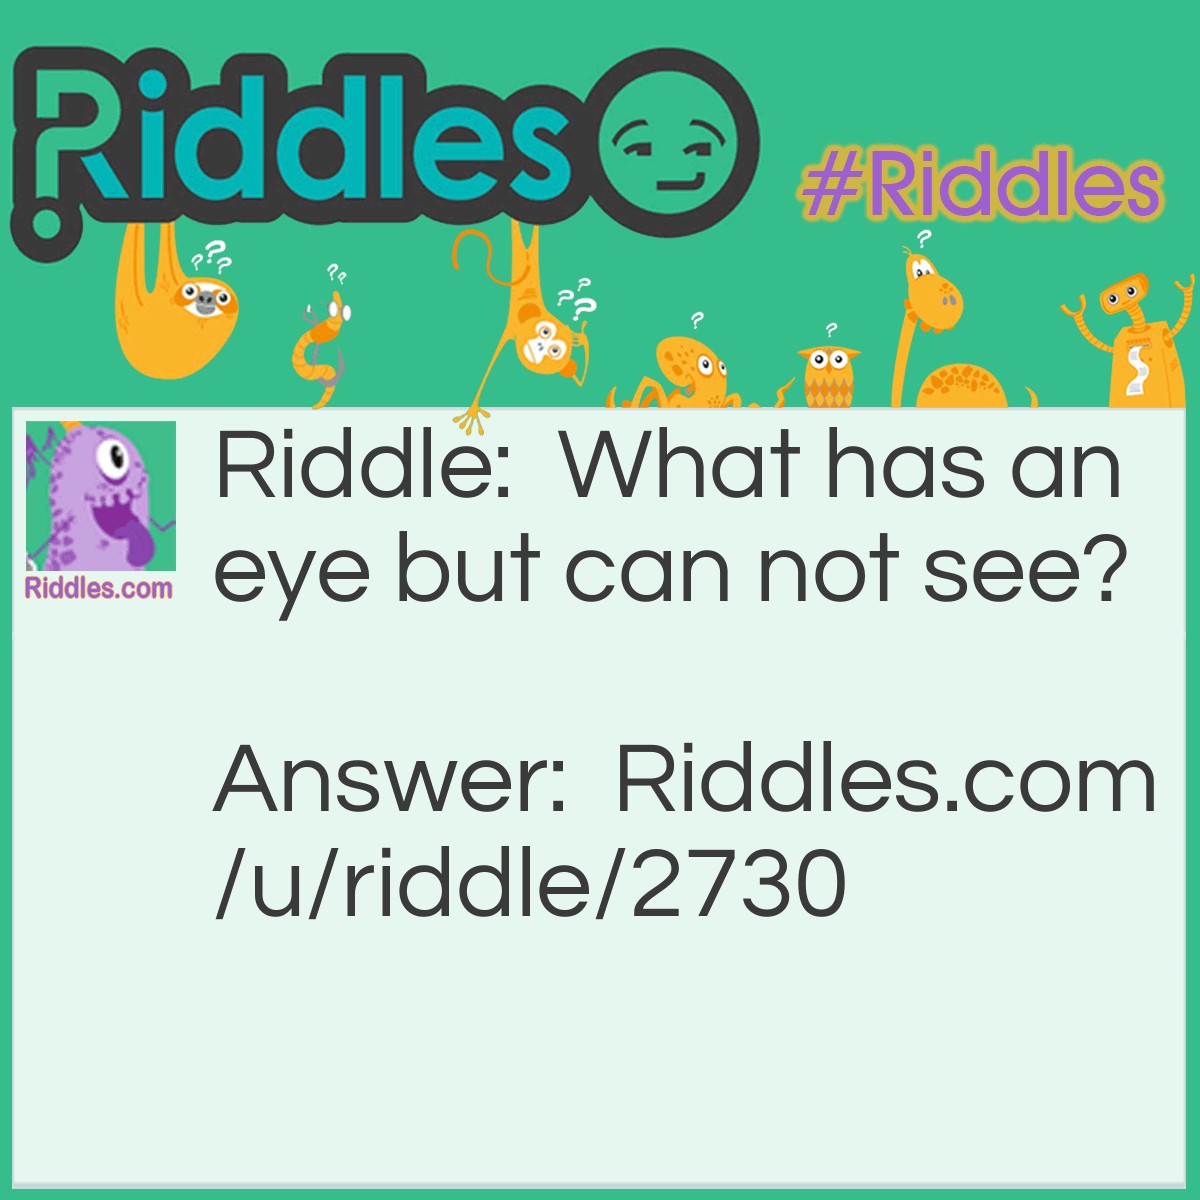 Riddle: What has an eye but can not see? Answer: A needle.